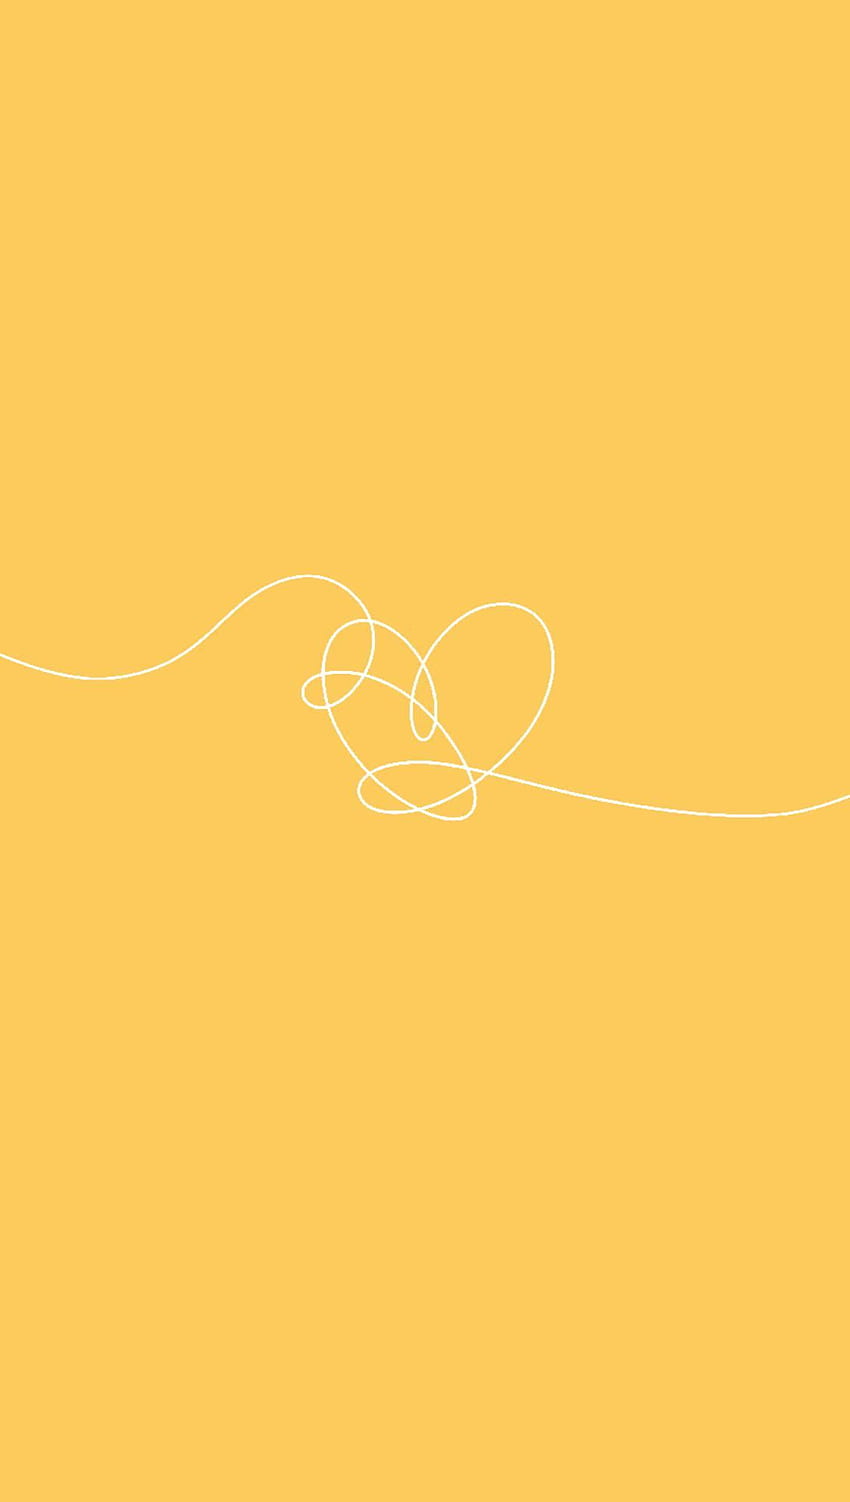 A line drawing of two hearts on yellow background - Light yellow